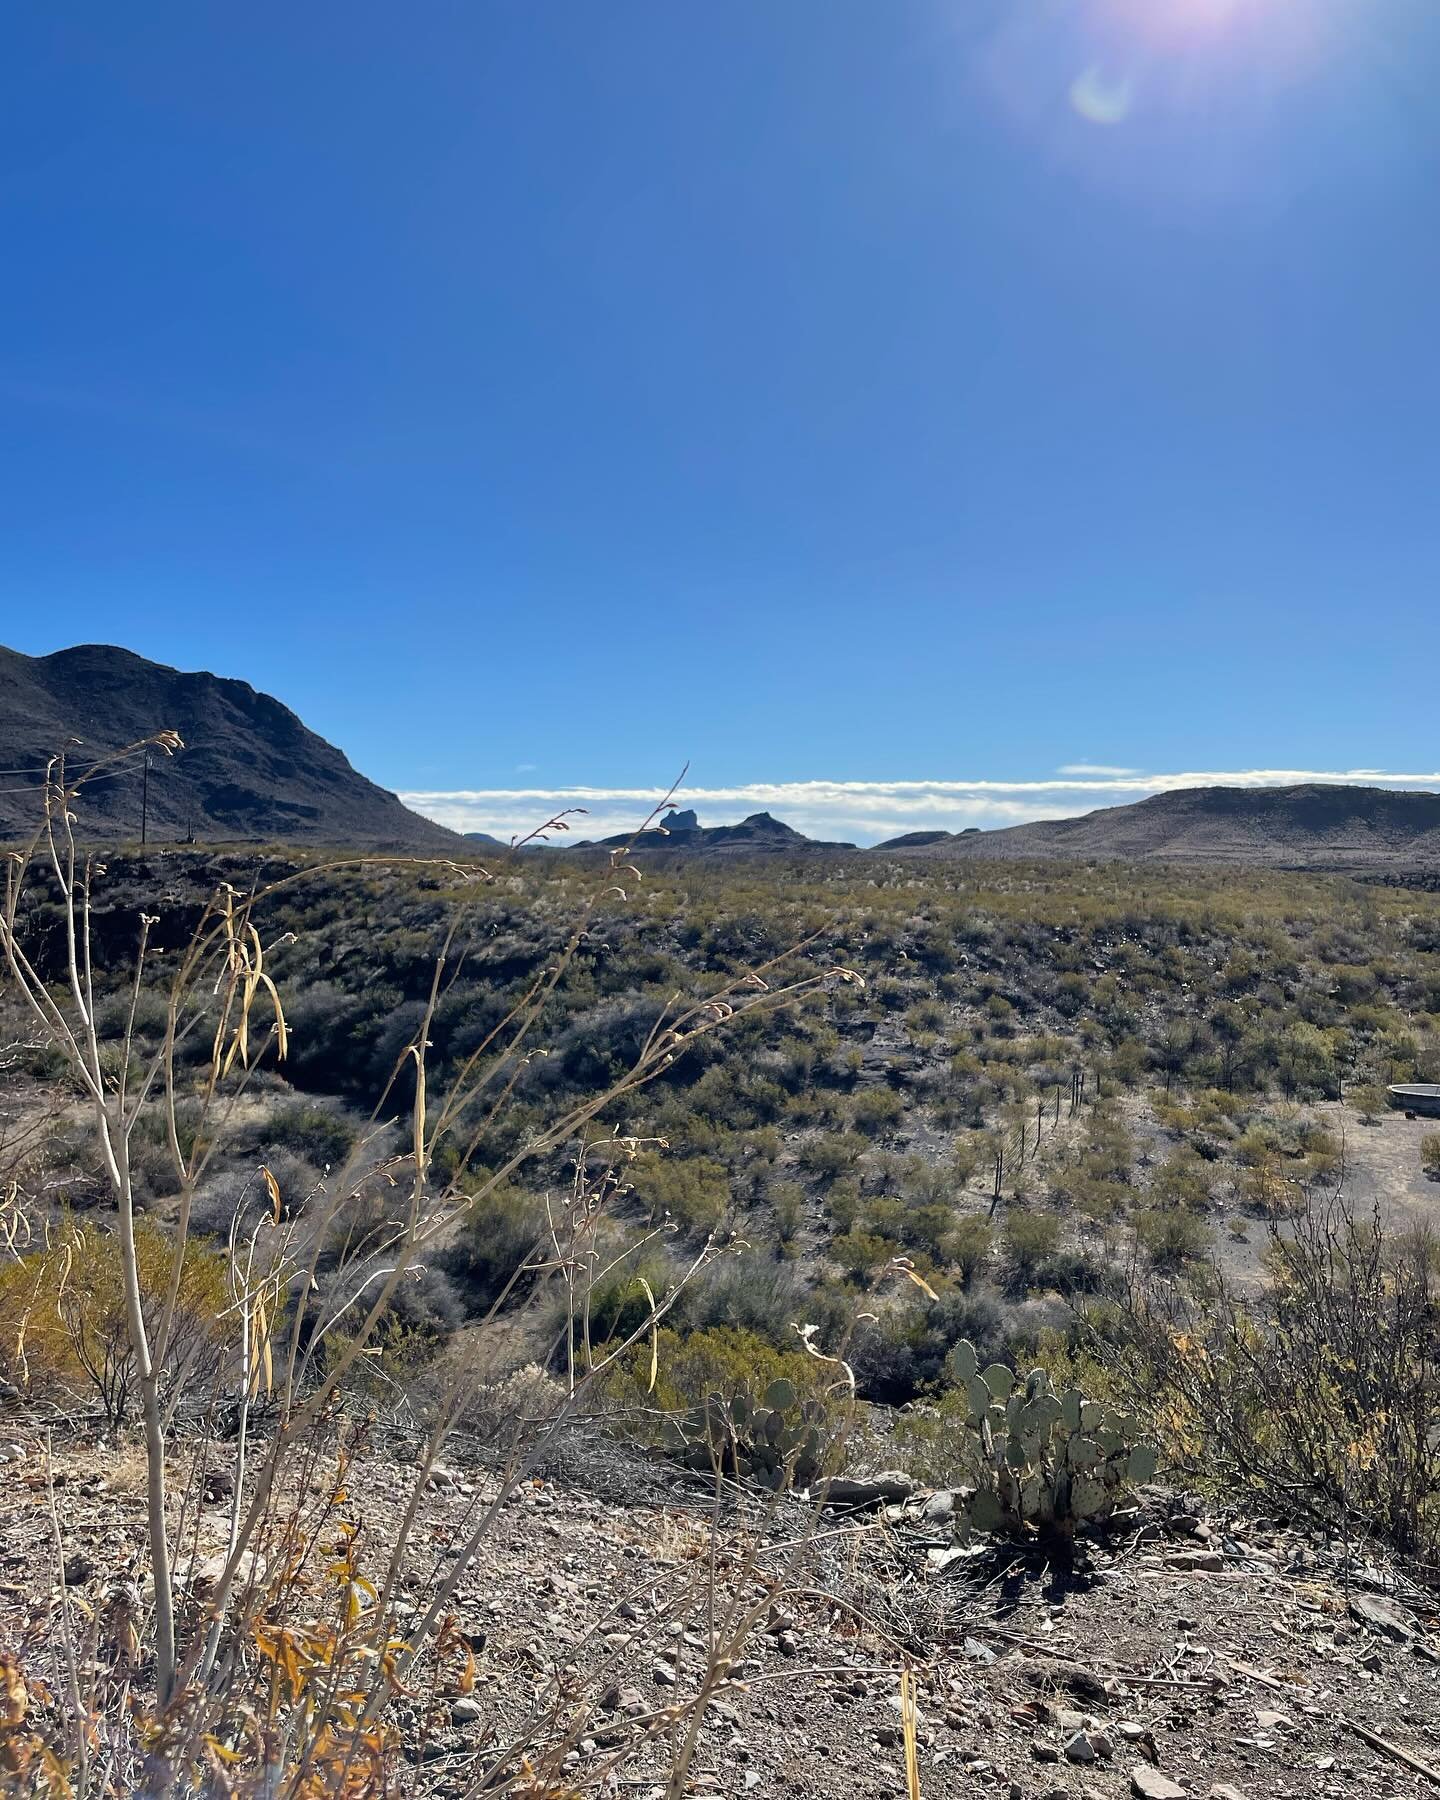 1800 Cibolo Creek Dr. Shafter, TX 160 Acres of high desert hills / 360 degree views / 2 Living spaces &amp; endless possibilities / located in Shafter by Three Sisters mountain in the Chinatis $1,500,000 @intag2336 #MarfaRealtyBroker #MarfaRealty #Ma